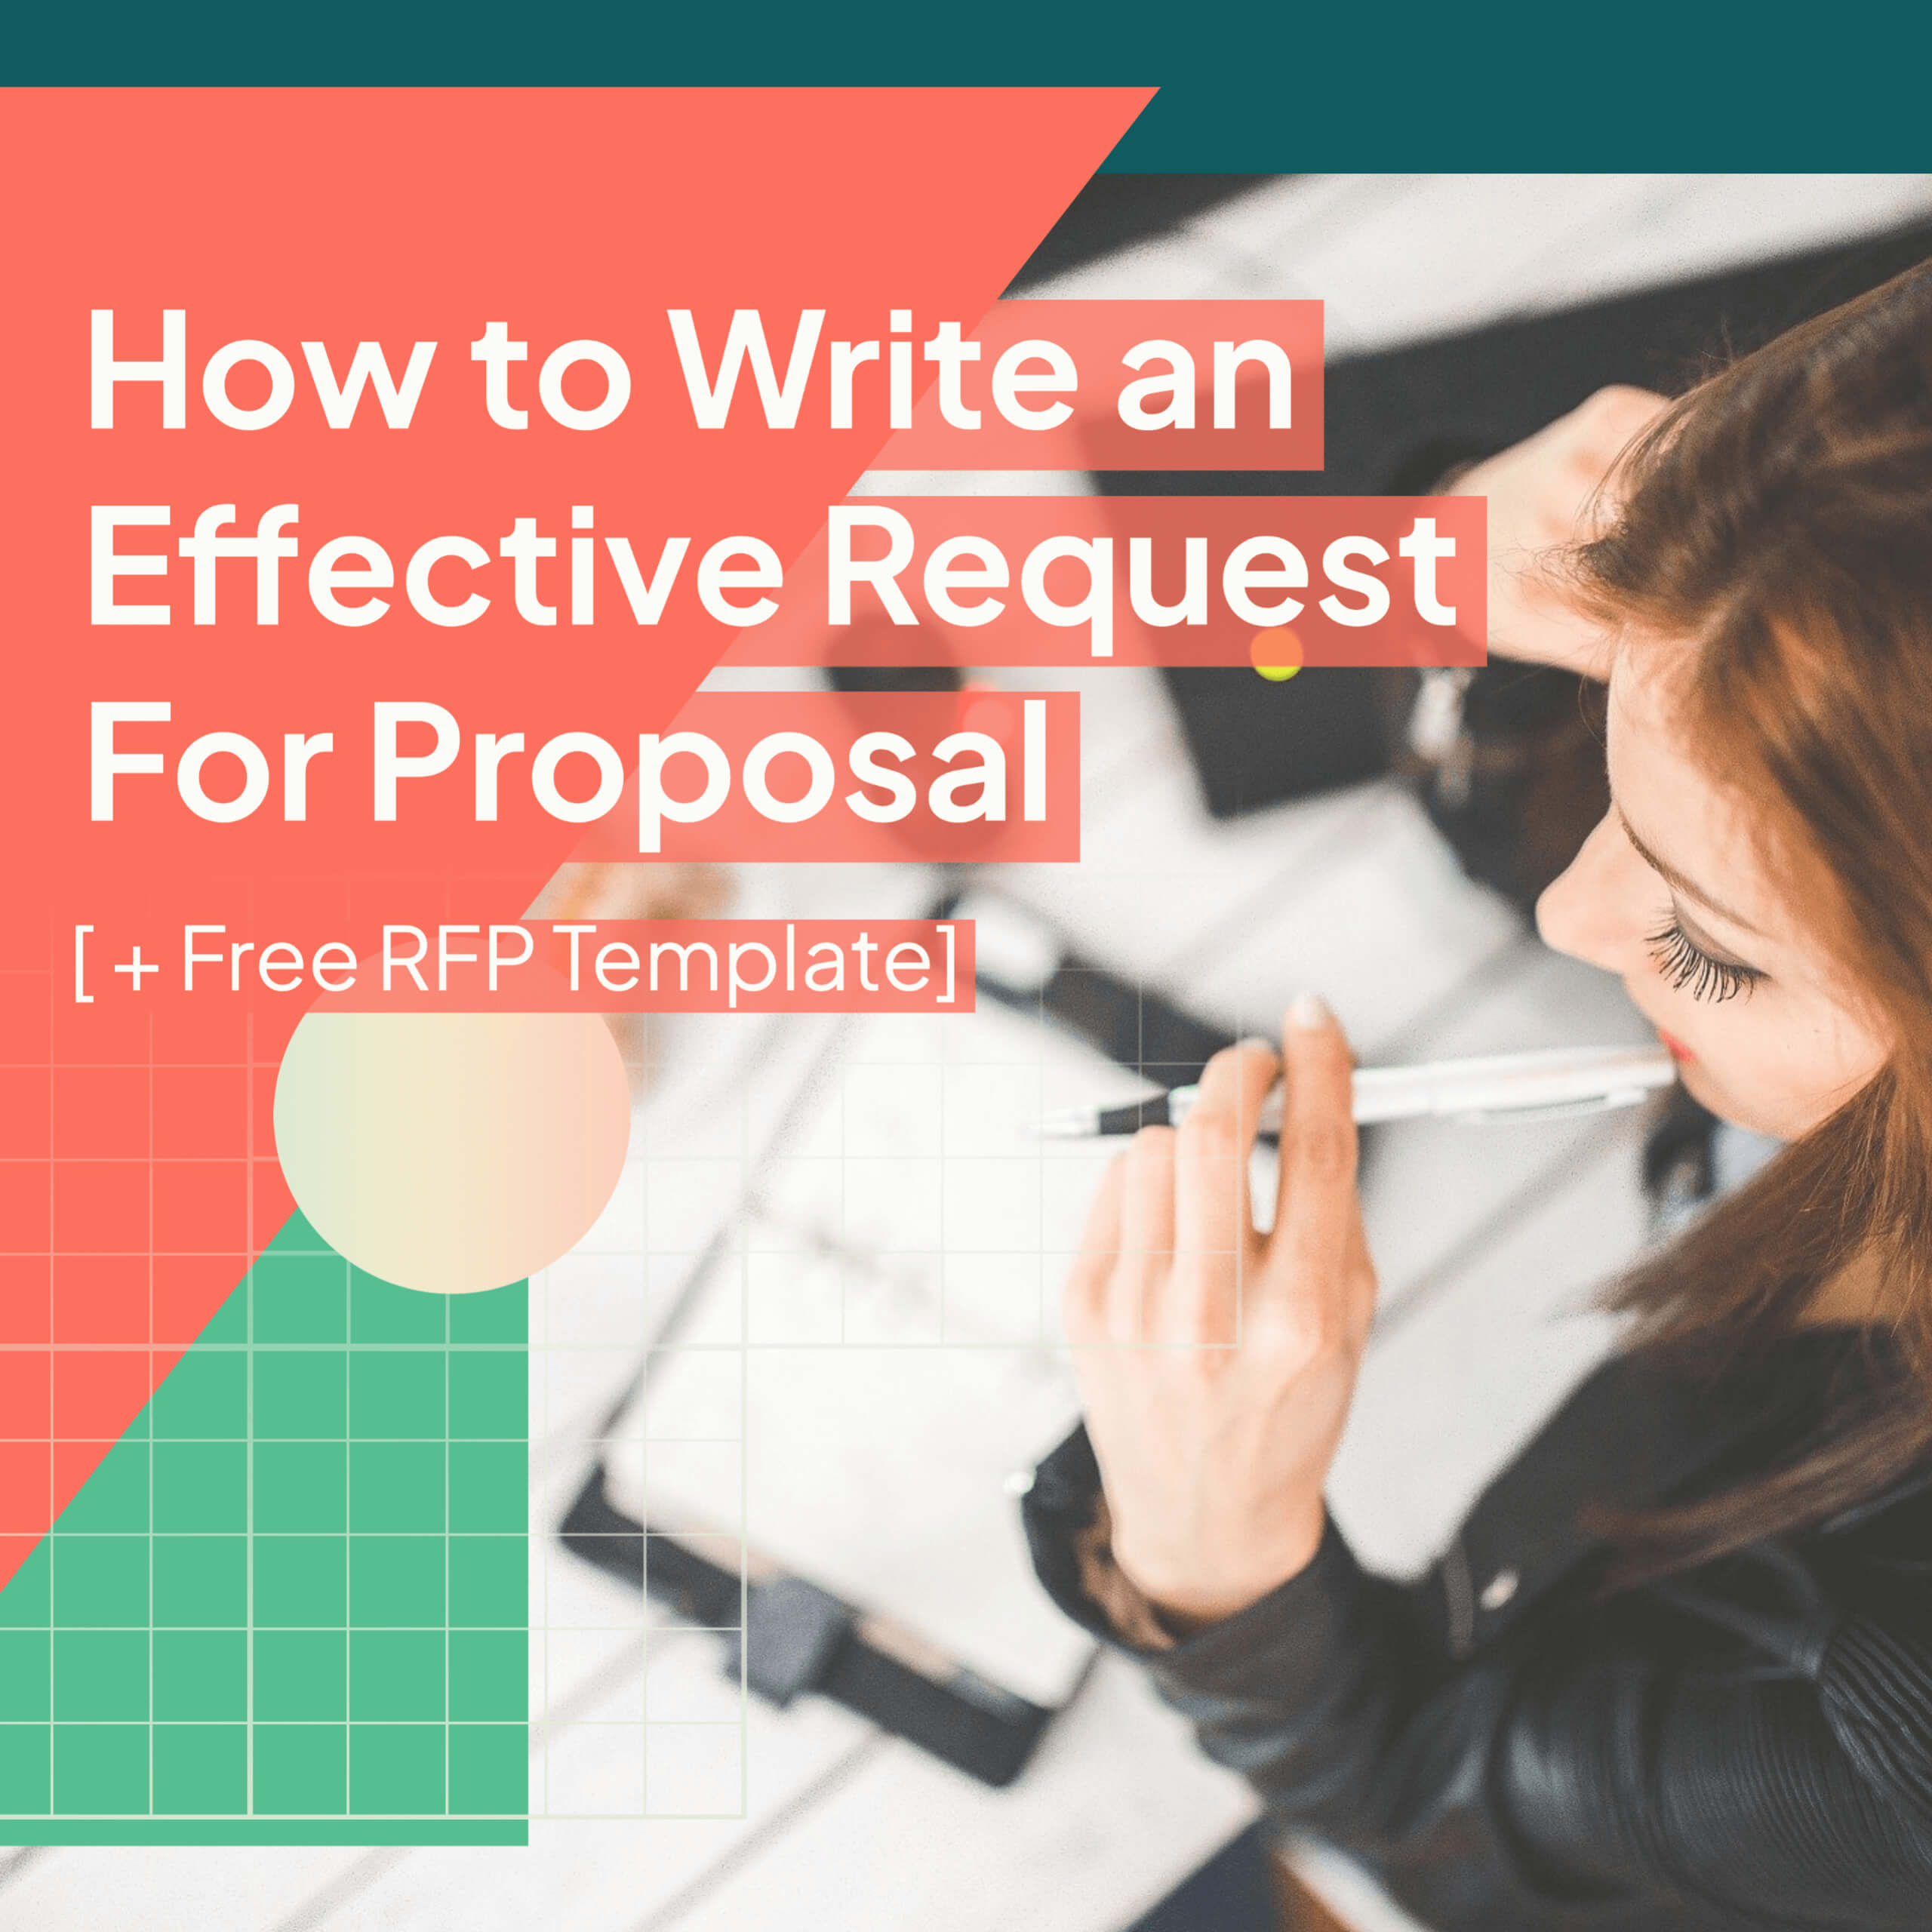 How to write an effective request for proposal (rfp)